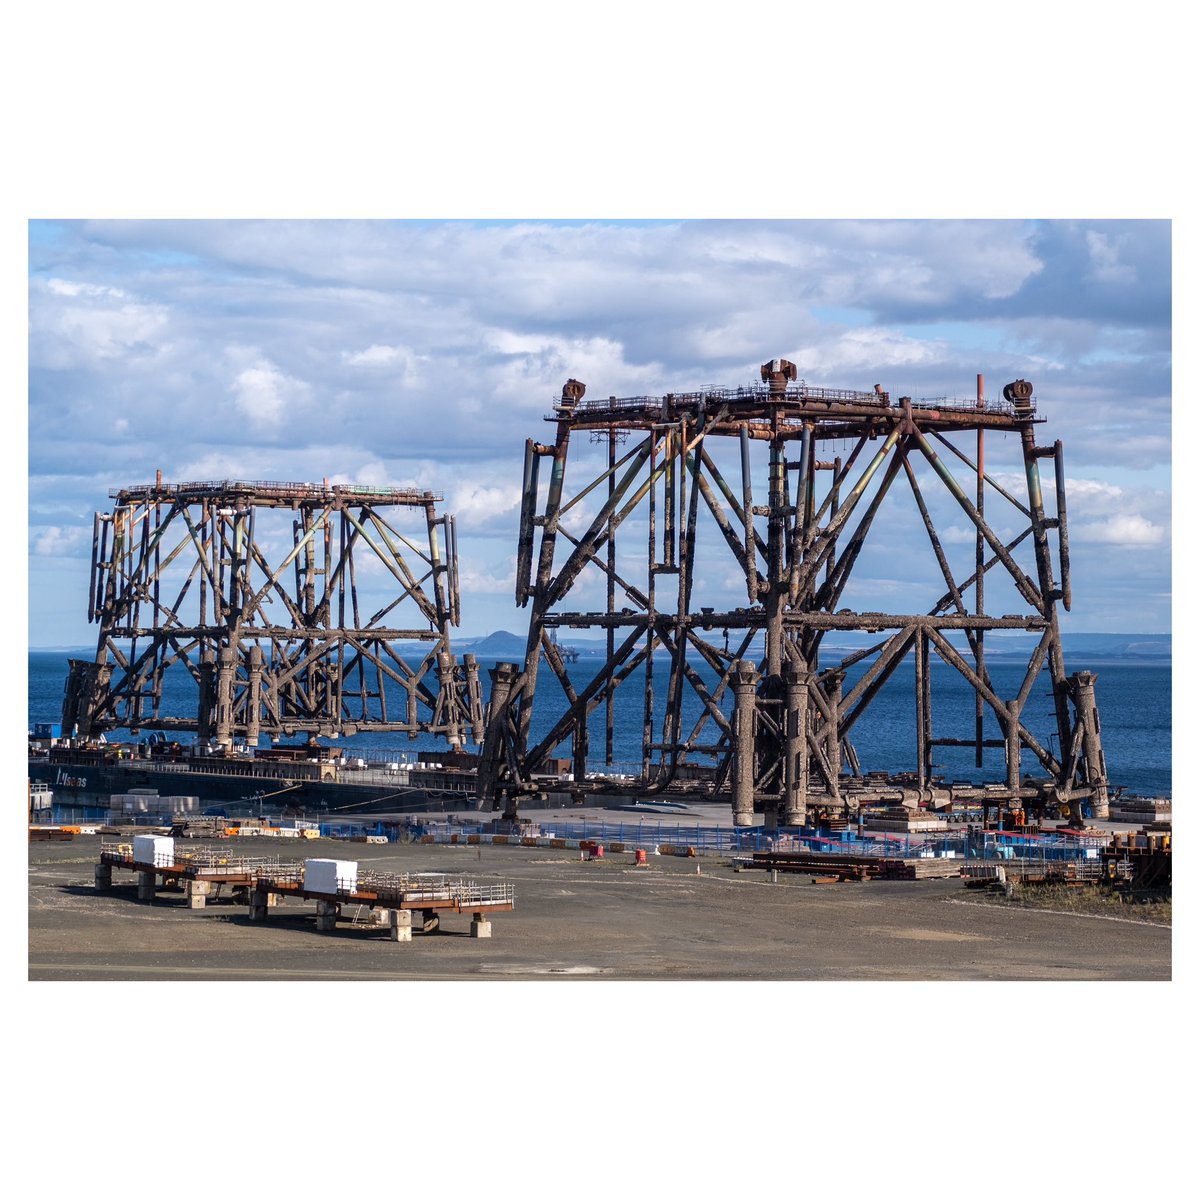 #oilrig dismantling at #methil #shipyard all that’s left are the rusted platforms.  #firthofforth #explorescotland #eastfife #scotland #landscapephotography #industriallandscape